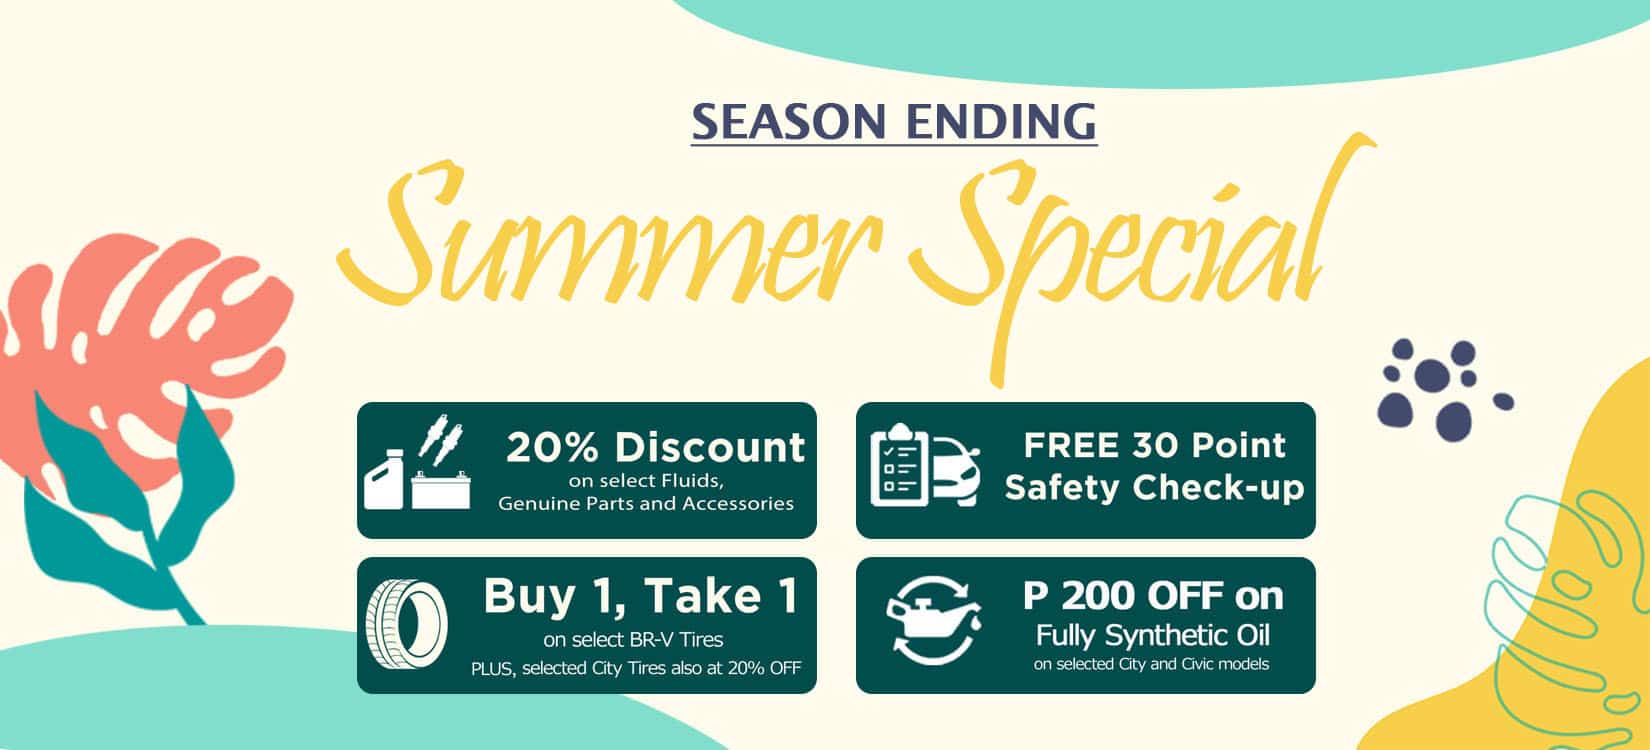 Avail great parts and accessories deals at Hondaâ€™s Season Ending Summer Special